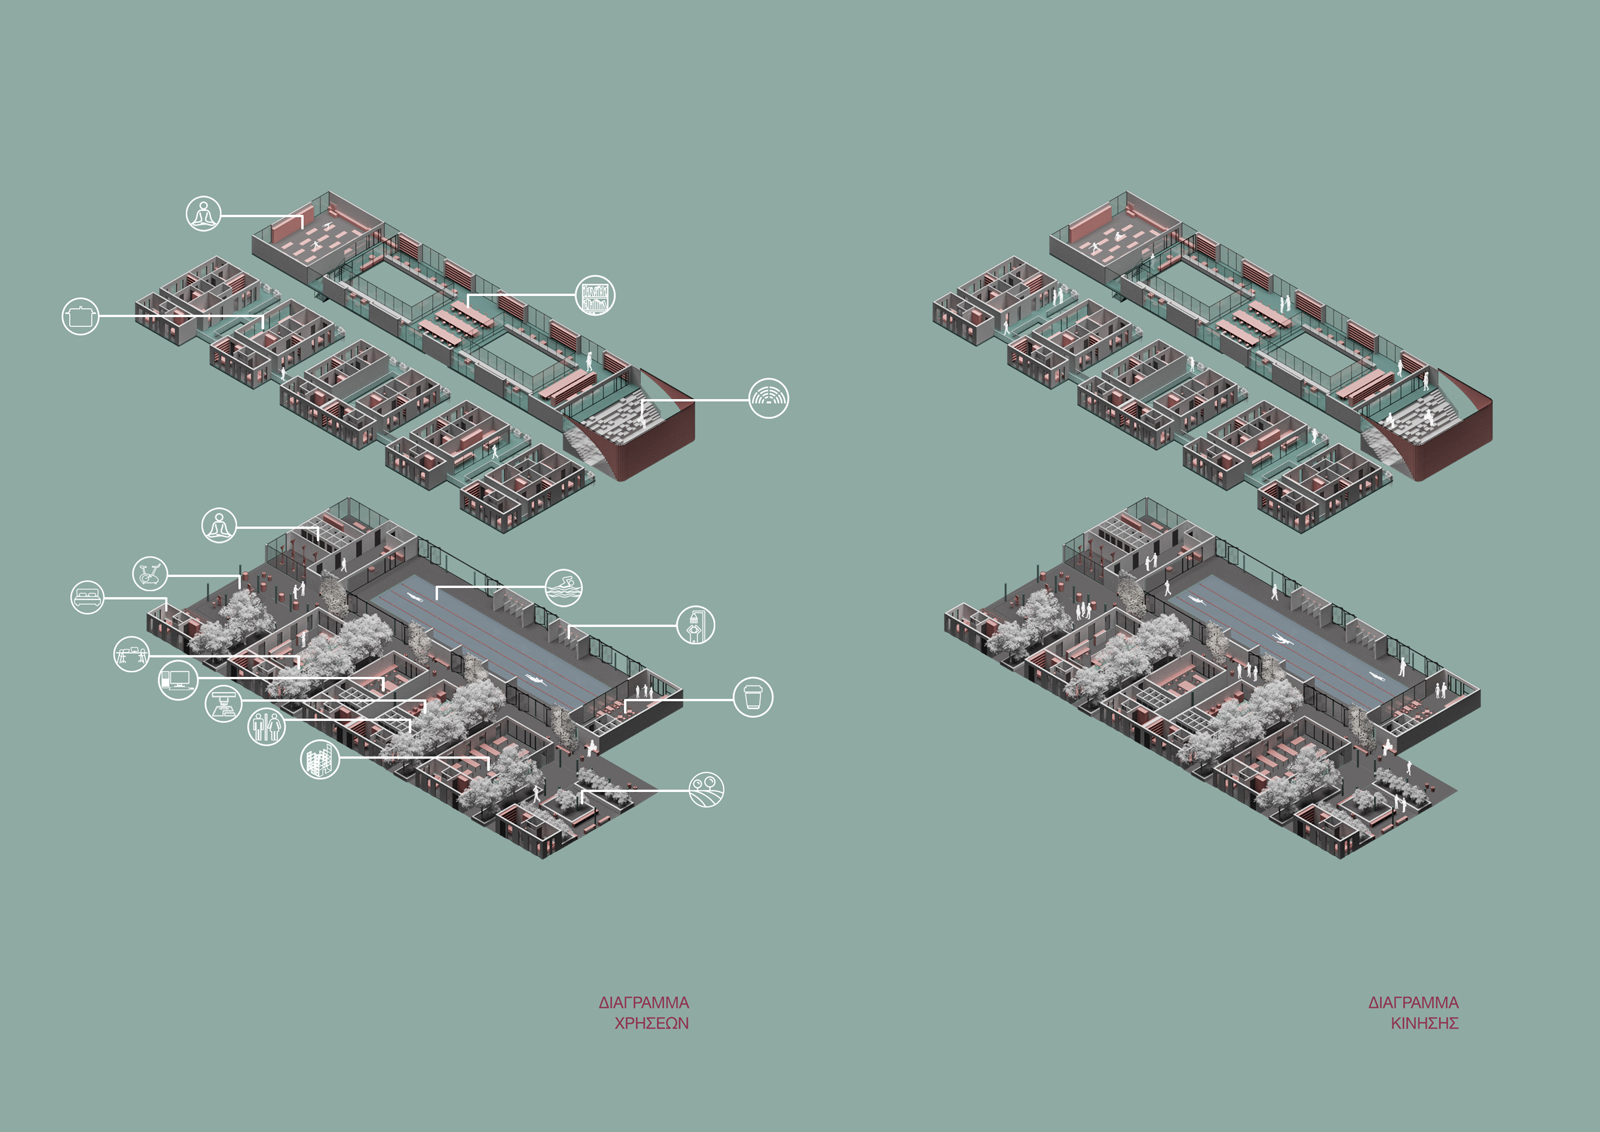 Archisearch YoUth Campus : Multifunctional Hub | Diploma thesis by Elli Koutsogianni & Patila Dimitra